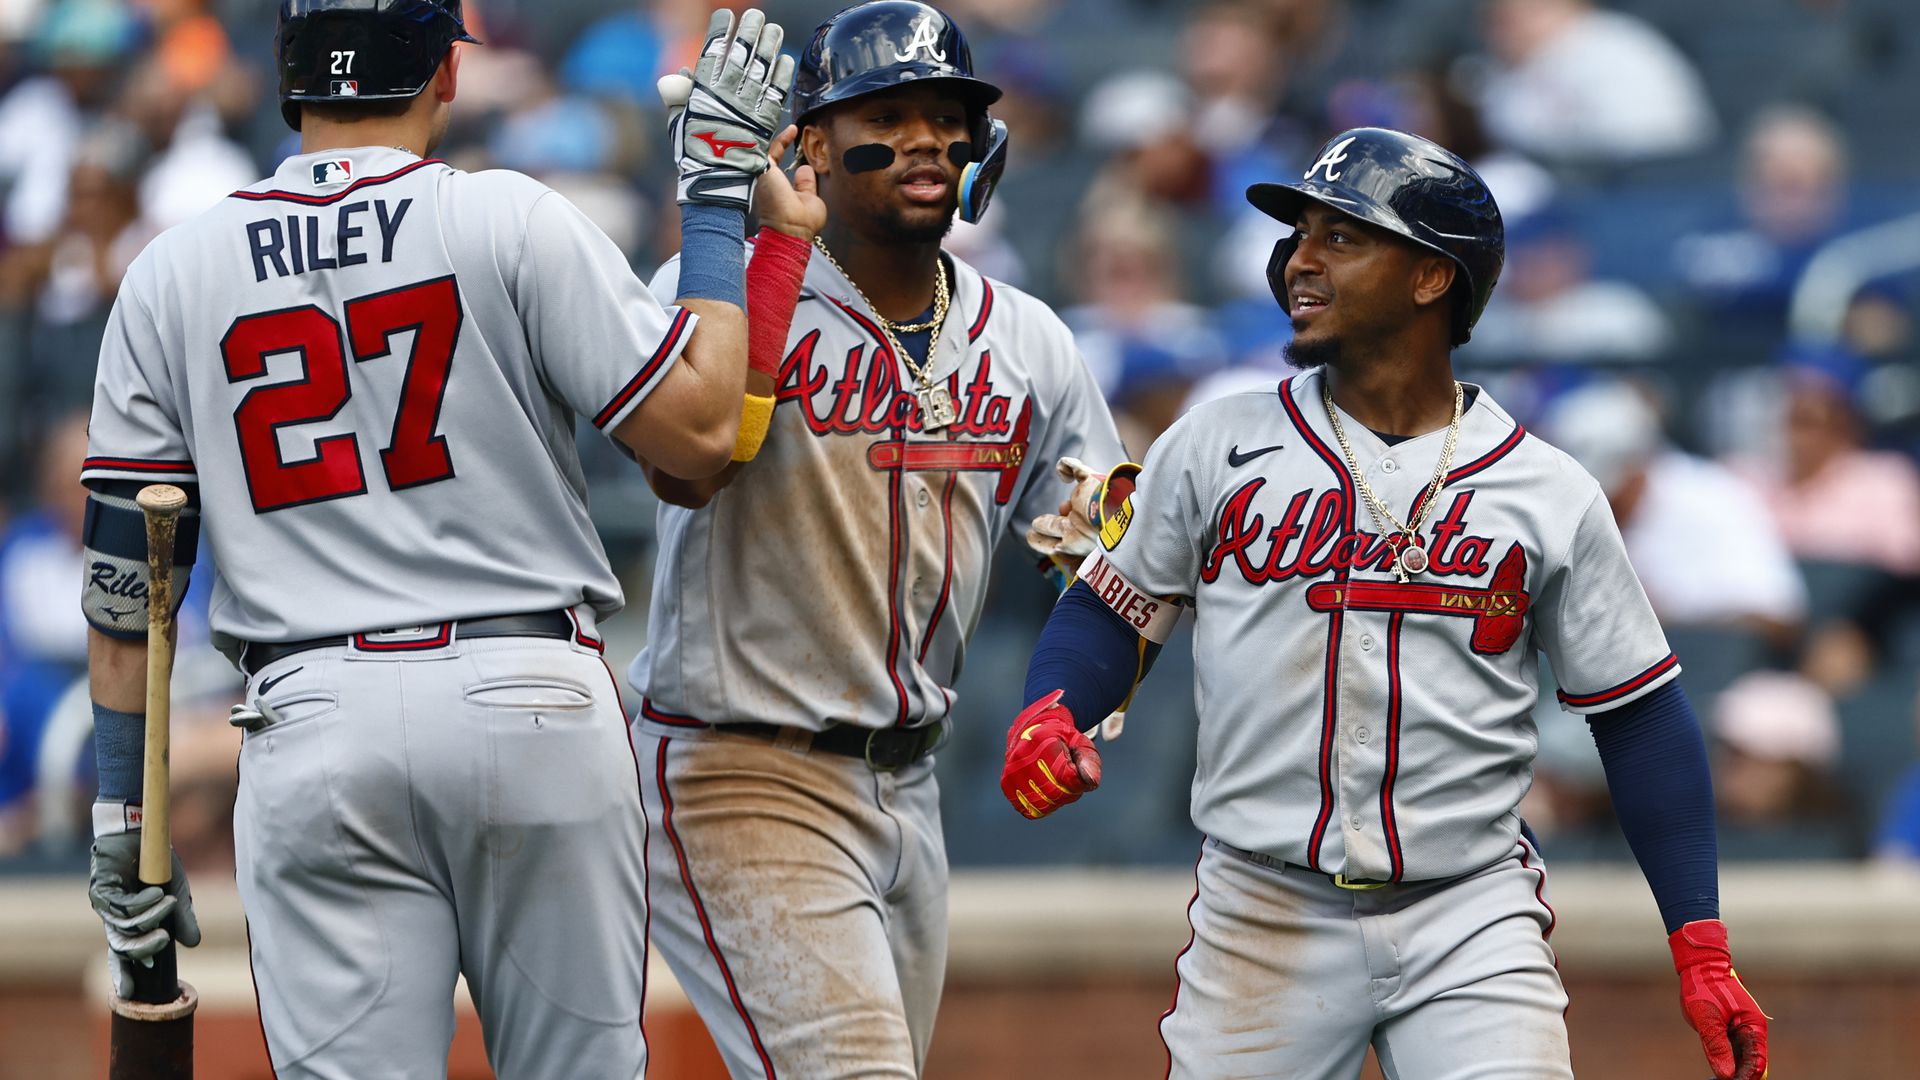 who could be the next life-long atlanta braves player?